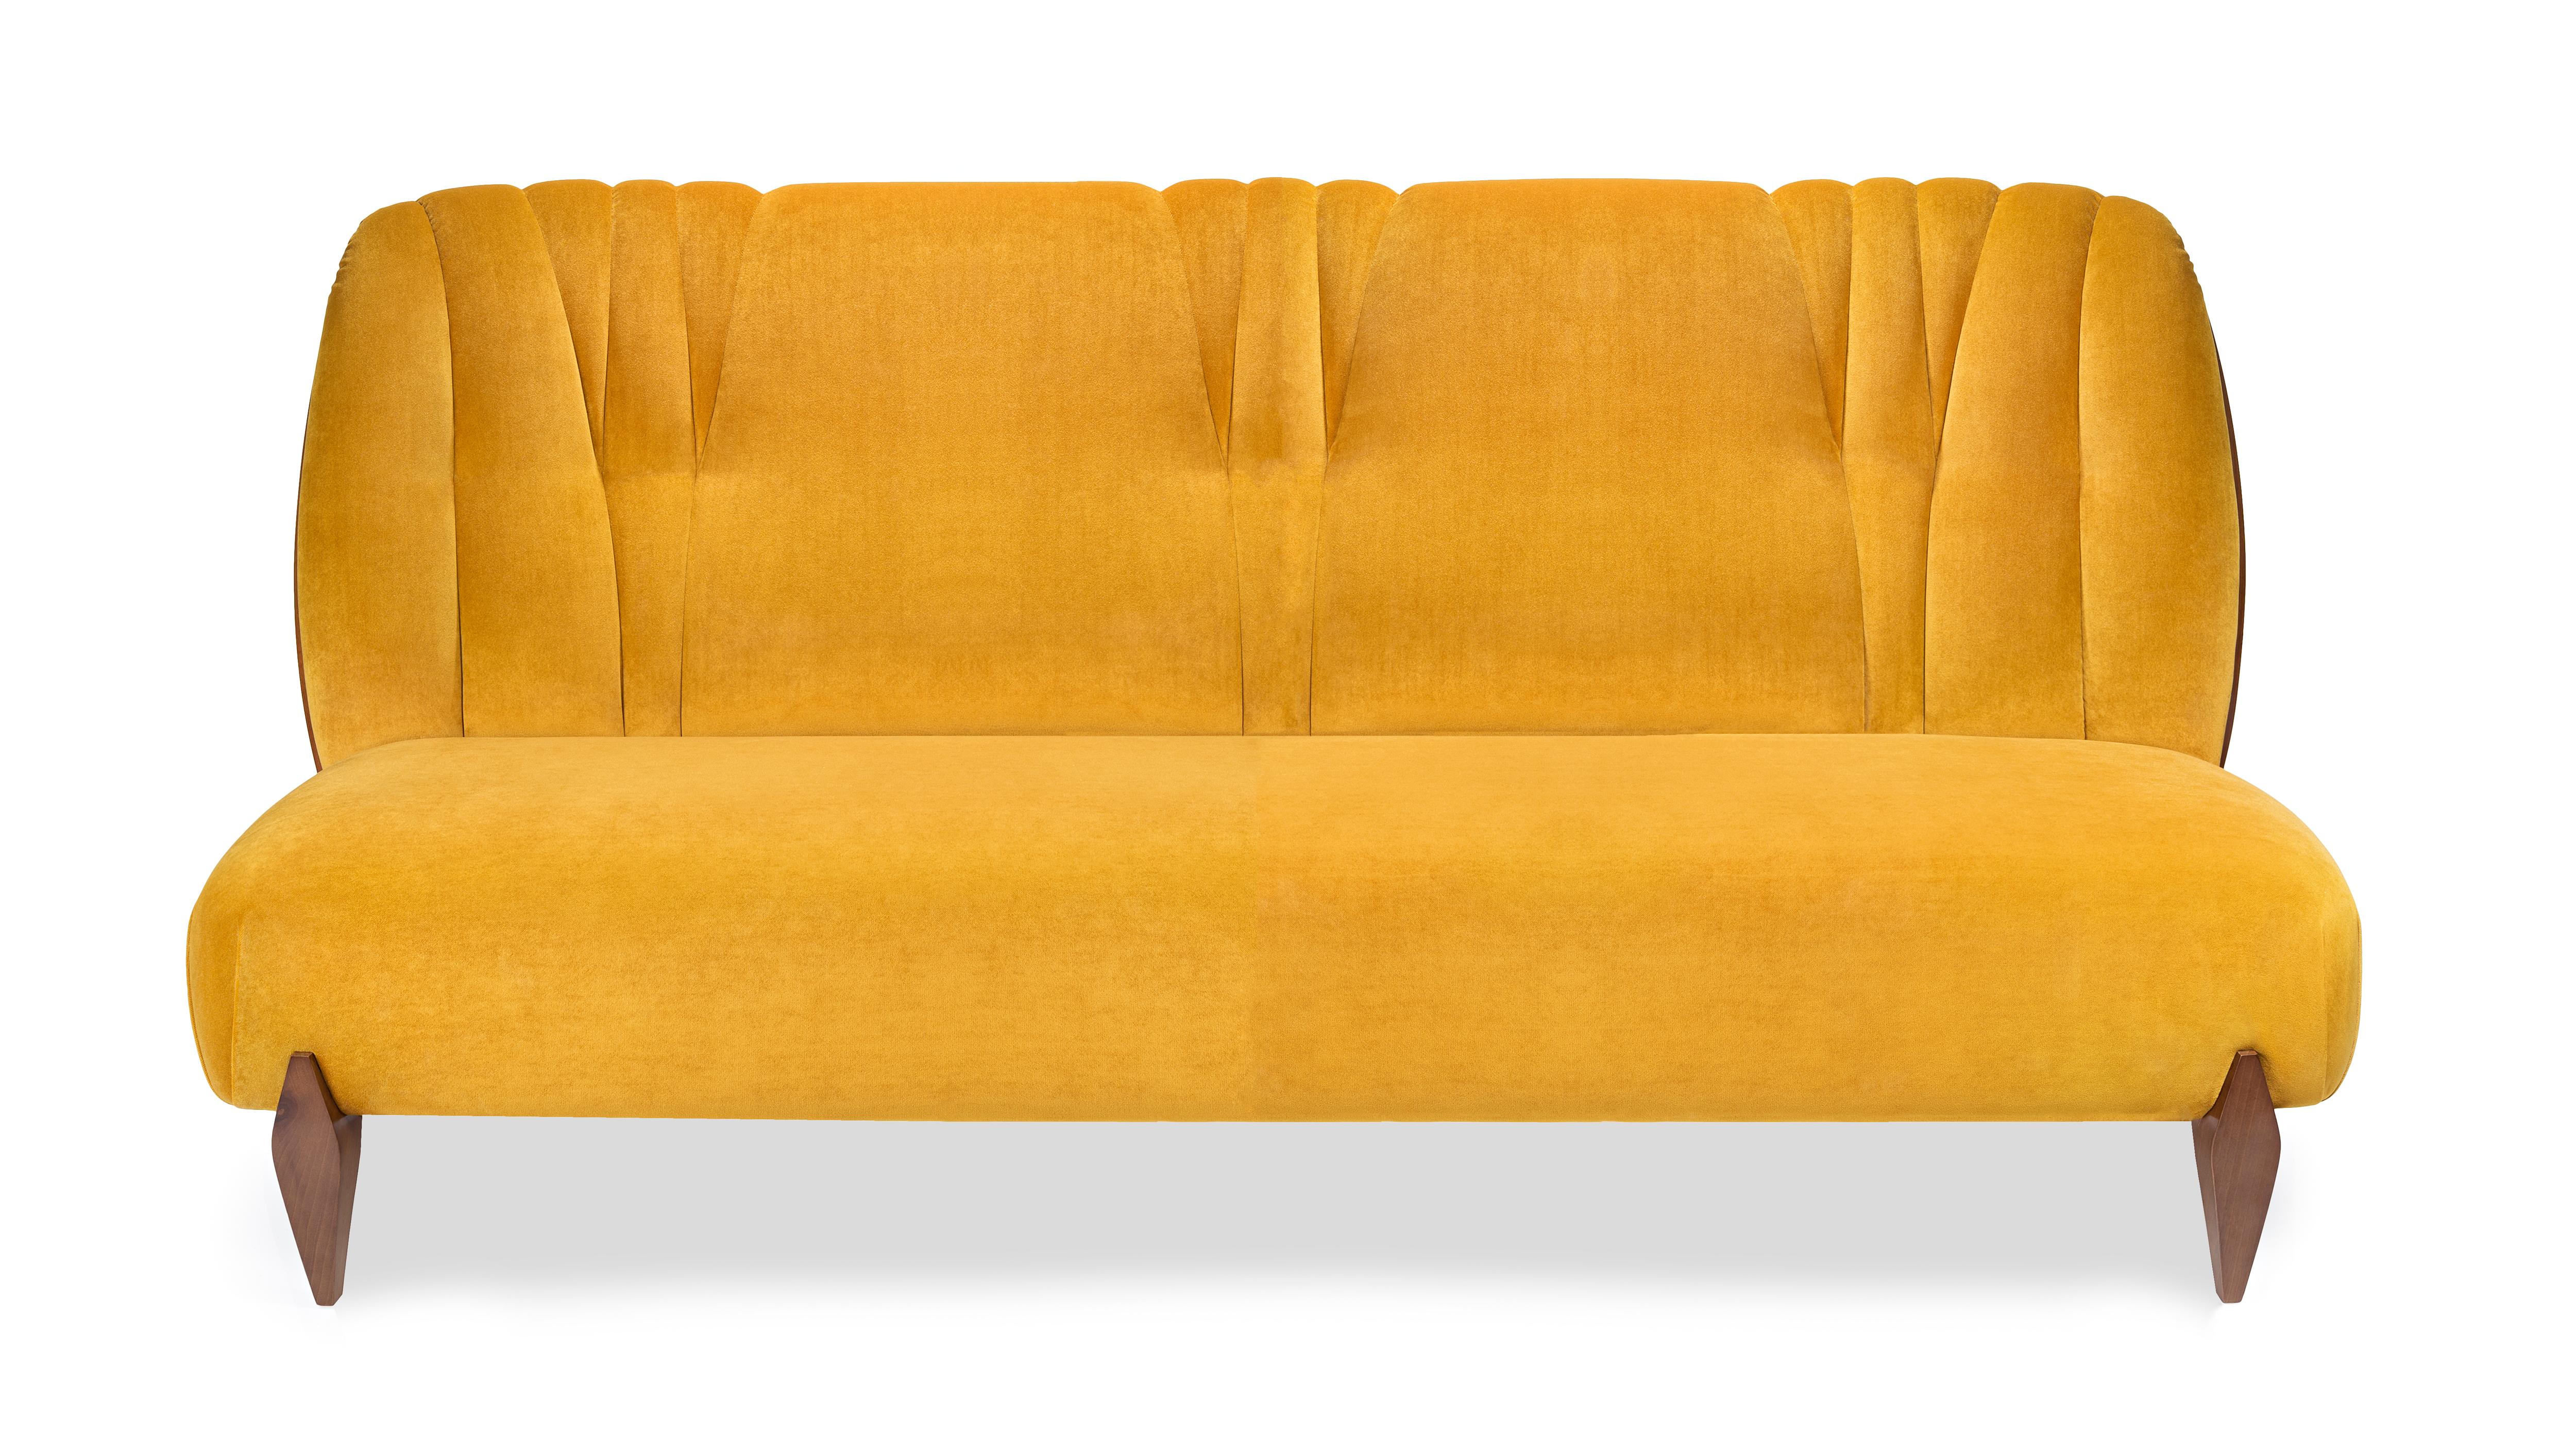 Na Pali 3 Seat Sofa by InsidherLand
Dimensions: D 82 x W 190 x H 95 cm.
Materials: Walnut, InsidherLand Bright Velvet Ref. Gold fabric.
60 kg.
Available in different fabrics.

The Na Pali sofa was designed as the original armchair, evoking the